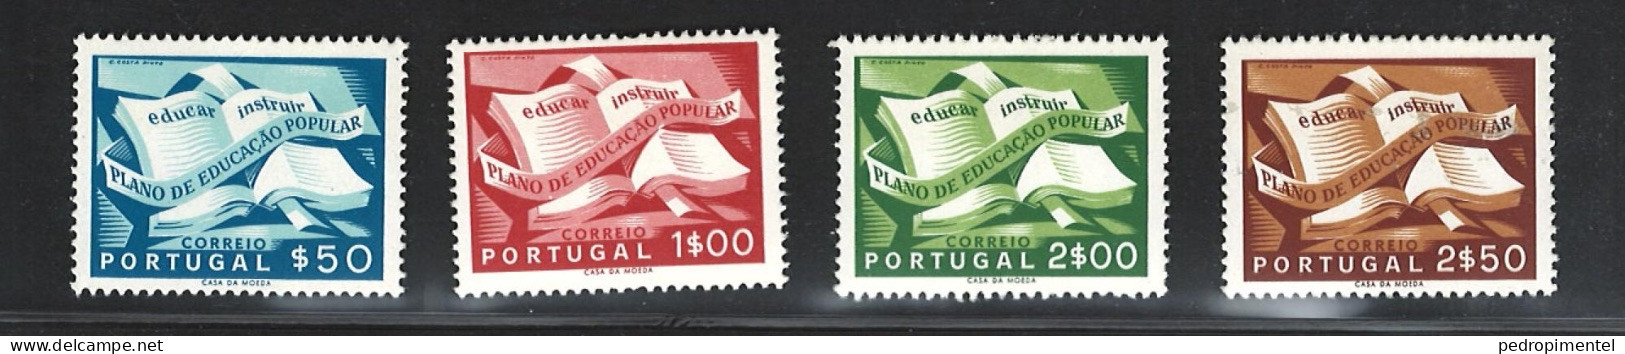 Portugal Stamps 1954 "Popular Education Plan" Condition MNH #796-799 - Nuovi